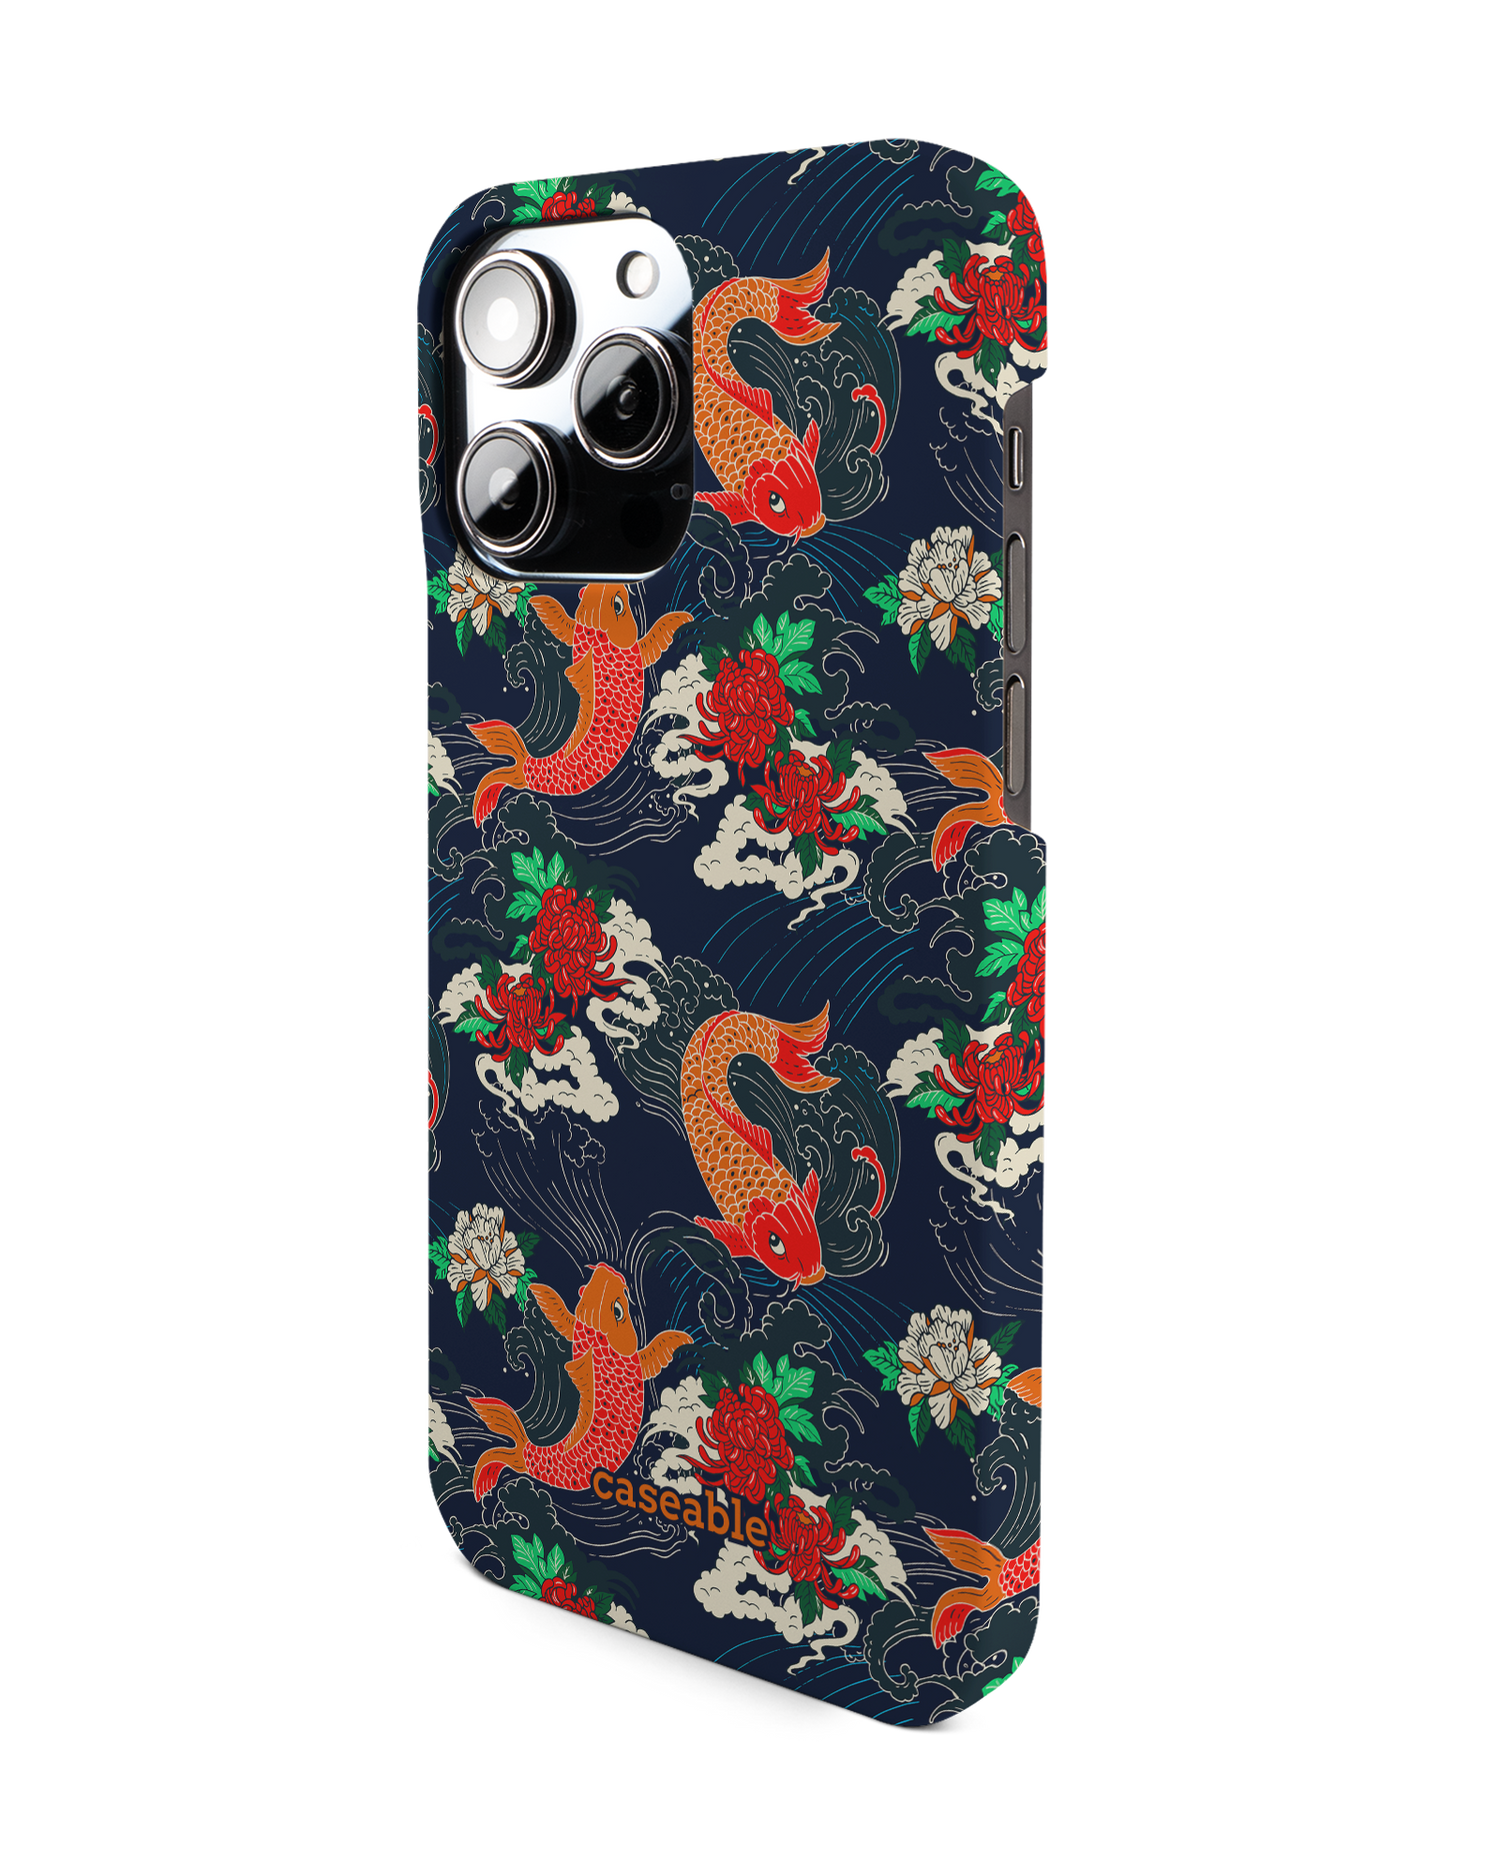 Repeating Koi Hard Shell Phone Case for Apple iPhone 14 Pro Max: View from the right side